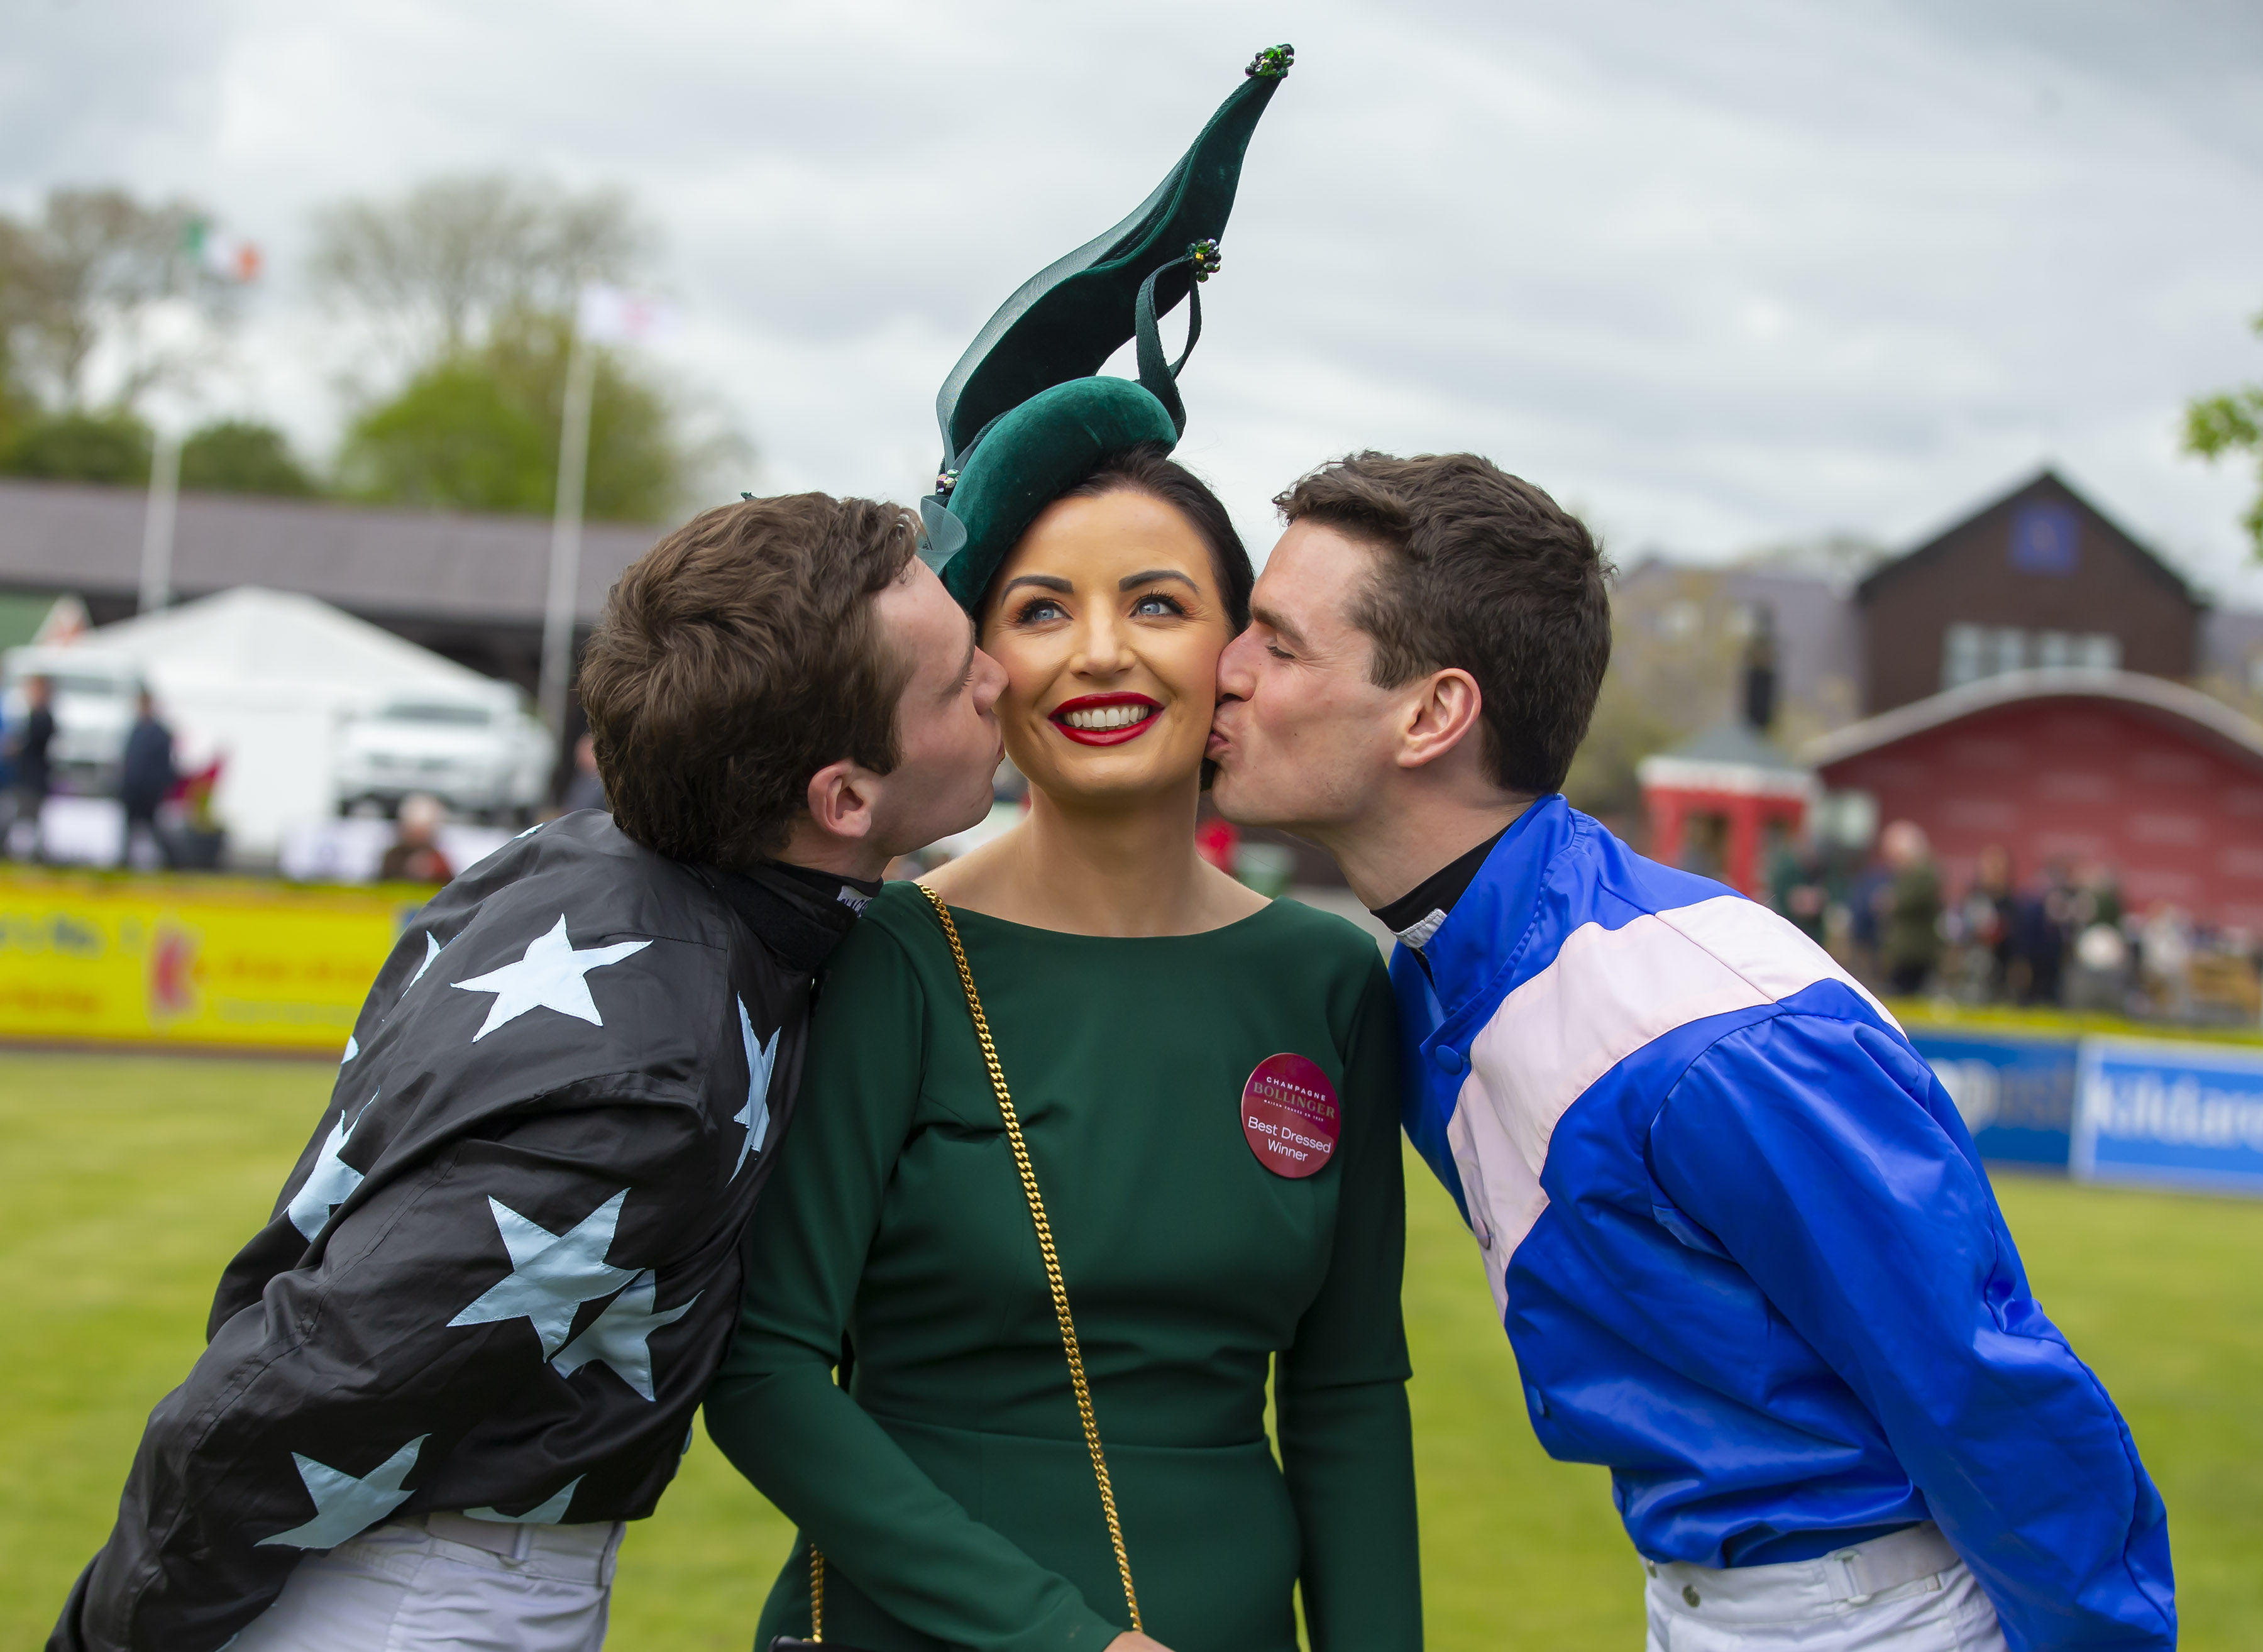 Stamina Thursday of the Punchestown Festival is a real crowd pleaser!